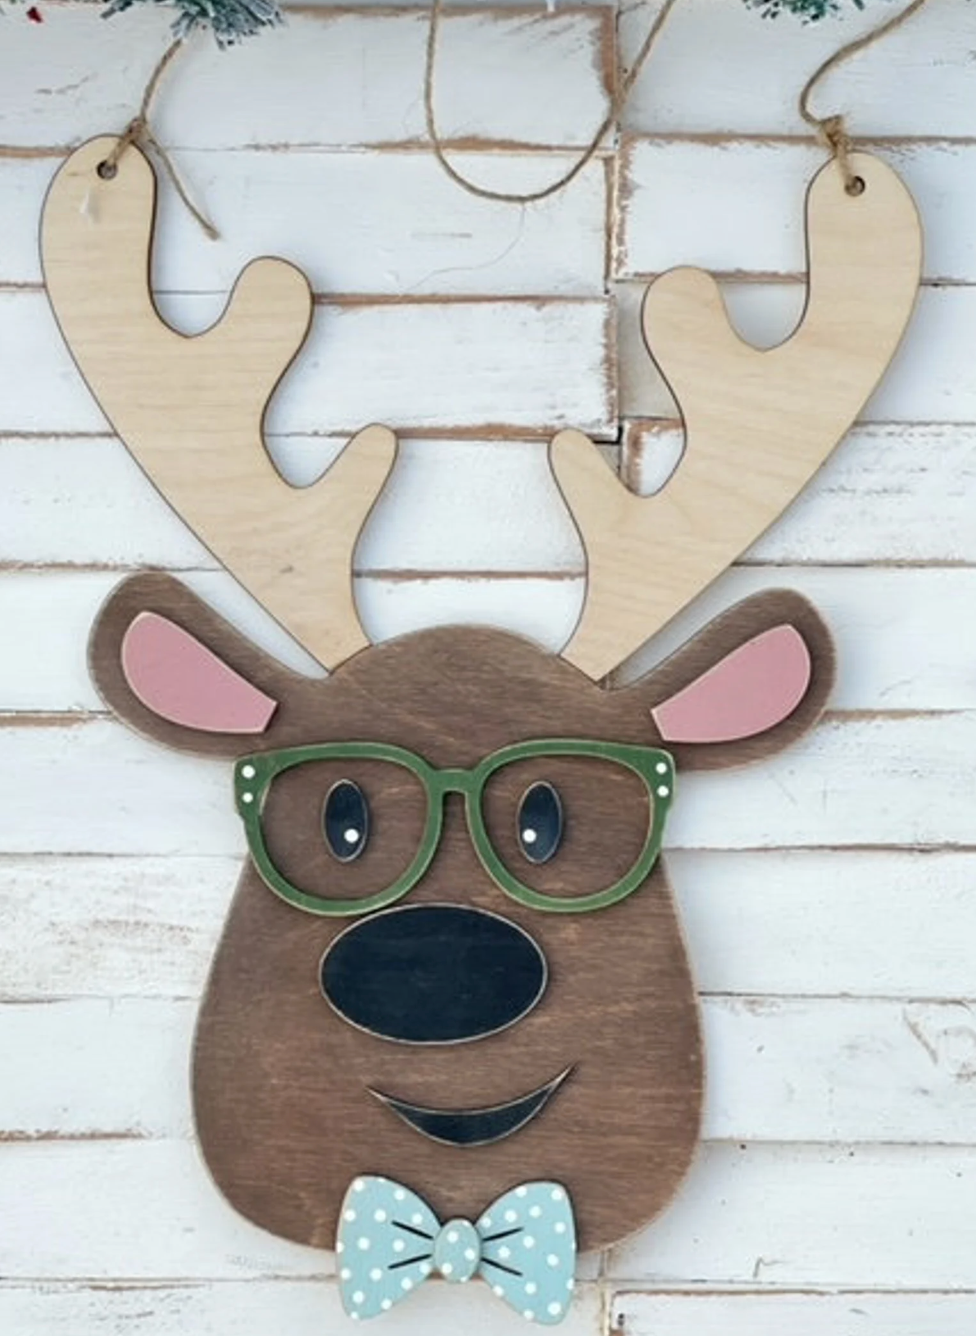 Build Your Own Reindeer Kit